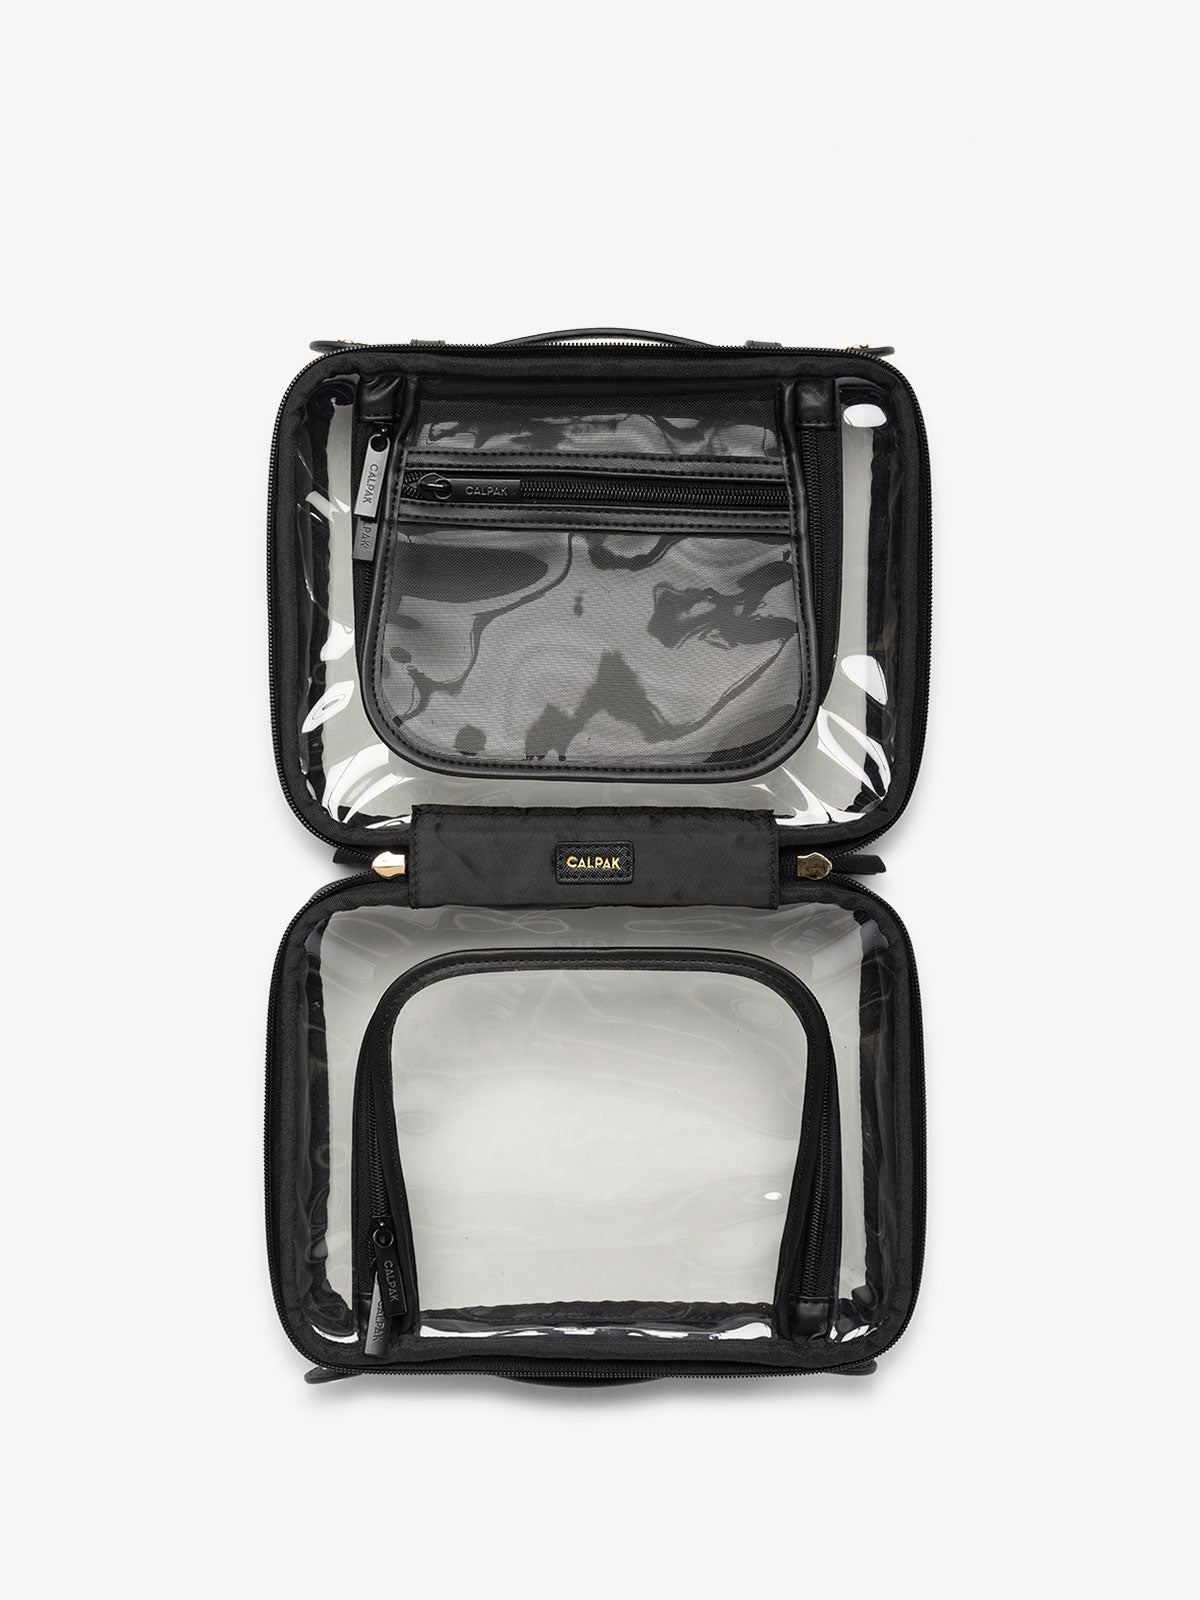 CALPAK medium clear skincare bag with multiple zippered compartments in black